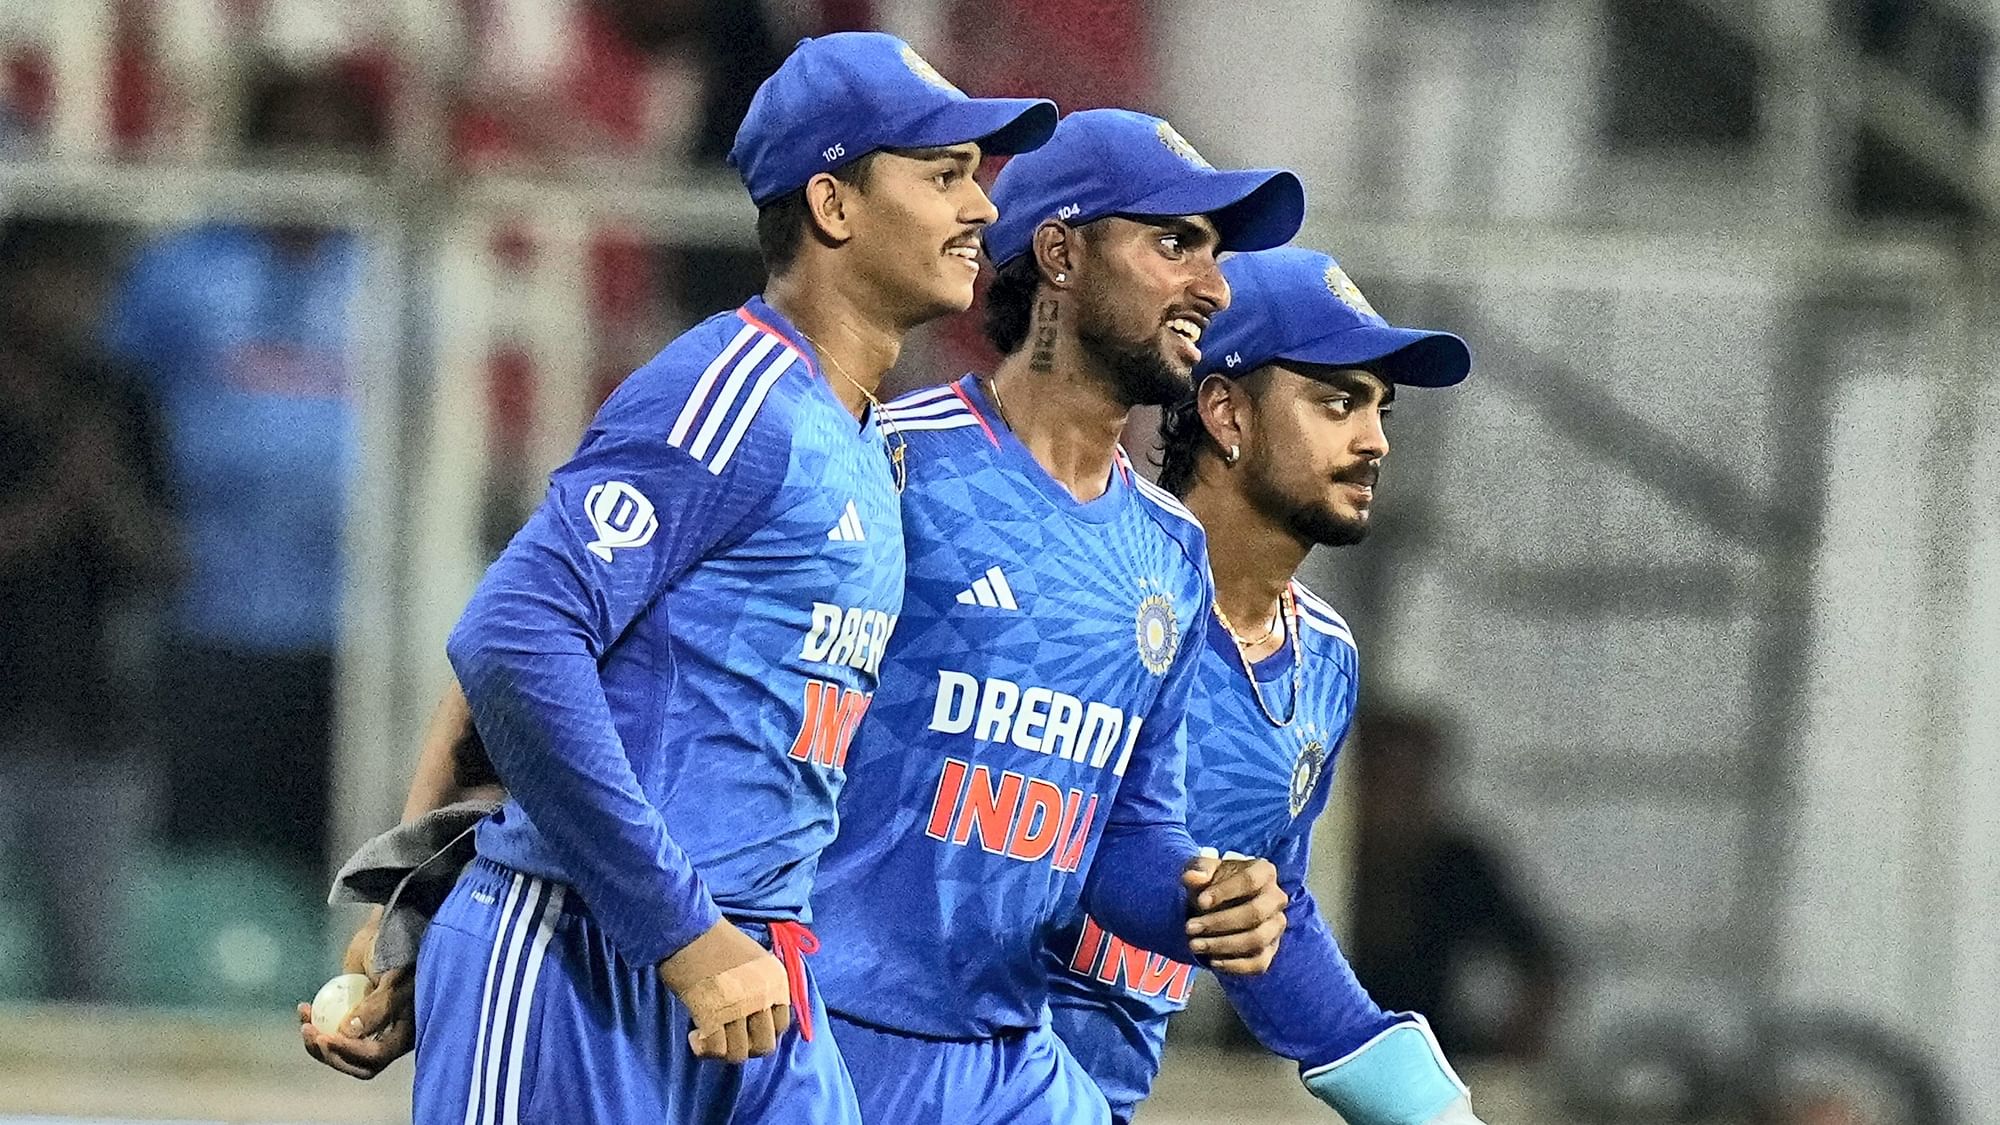 <div class="paragraphs"><p>Indian players Tilak Varma, Yashasvi Jaiswal and Ishan Kishan celebrate the wicket of Australia's batter Steven Smith during the second T20 International cricket match of a T20I series between India and Australia, at the Greenfield International Stadium, in Thiruvananthapuram, Sunday, Nov. 26, 2023.</p></div>